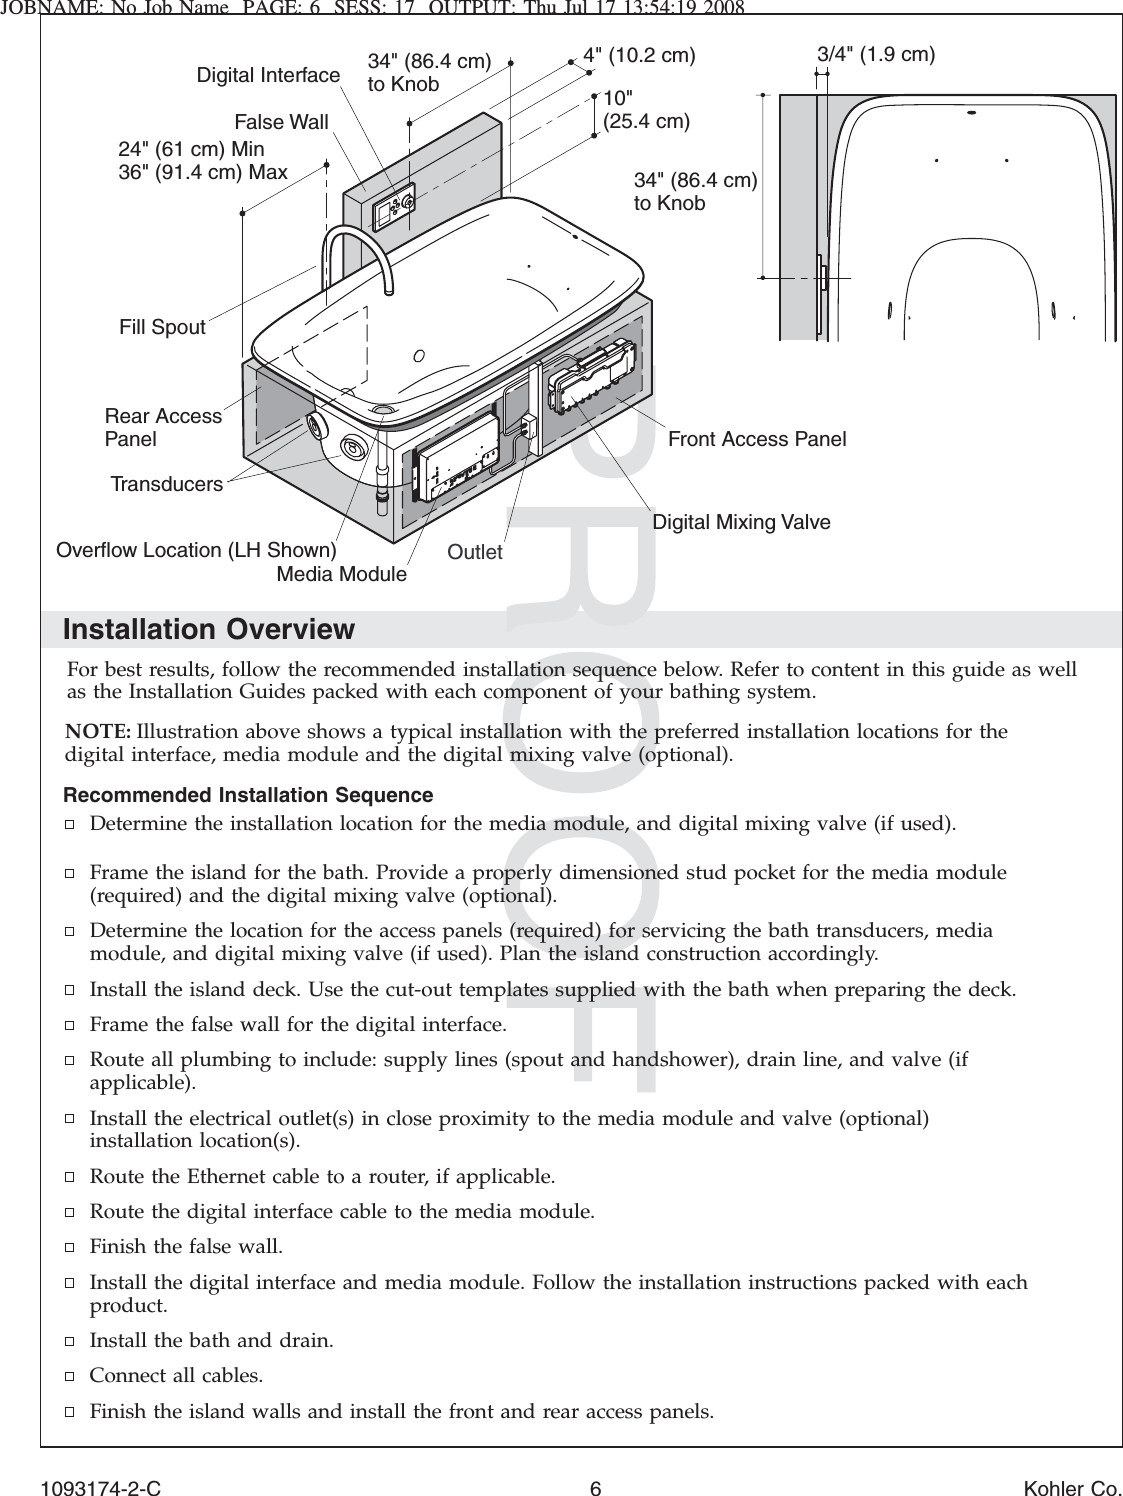 JOBNAME: No Job Name PAGE: 6 SESS: 17 OUTPUT: Thu Jul 17 13:54:19 2008Installation OverviewFor best results, follow the recommended installation sequence below. Refer to content in this guide as wellas the Installation Guides packed with each component of your bathing system.NOTE: Illustration above shows a typical installation with the preferred installation locations for thedigital interface, media module and the digital mixing valve (optional).Recommended Installation SequenceDetermine the installation location for the media module, and digital mixing valve (if used).Frame the island for the bath. Provide a properly dimensioned stud pocket for the media module(required) and the digital mixing valve (optional).Determine the location for the access panels (required) for servicing the bath transducers, mediamodule, and digital mixing valve (if used). Plan the island construction accordingly.Install the island deck. Use the cut-out templates supplied with the bath when preparing the deck.Frame the false wall for the digital interface.Route all plumbing to include: supply lines (spout and handshower), drain line, and valve (ifapplicable).Install the electrical outlet(s) in close proximity to the media module and valve (optional)installation location(s).Route the Ethernet cable to a router, if applicable.Route the digital interface cable to the media module.Finish the false wall.Install the digital interface and media module. Follow the installation instructions packed with eachproduct.Install the bath and drain.Connect all cables.Finish the island walls and install the front and rear access panels.Rear Access PanelOverflow Location (LH Shown)Front Access Panel24&quot; (61 cm) Min36&quot; (91.4 cm) Max3/4&quot; (1.9 cm)10&quot; (25.4 cm)4&quot; (10.2 cm)Digital InterfaceMedia Module34&quot; (86.4 cm) to Knob34&quot; (86.4 cm) to KnobOutletFill SpoutDigital Mixing ValveFalse WallTransducers1093174-2-C 6 Kohler Co.